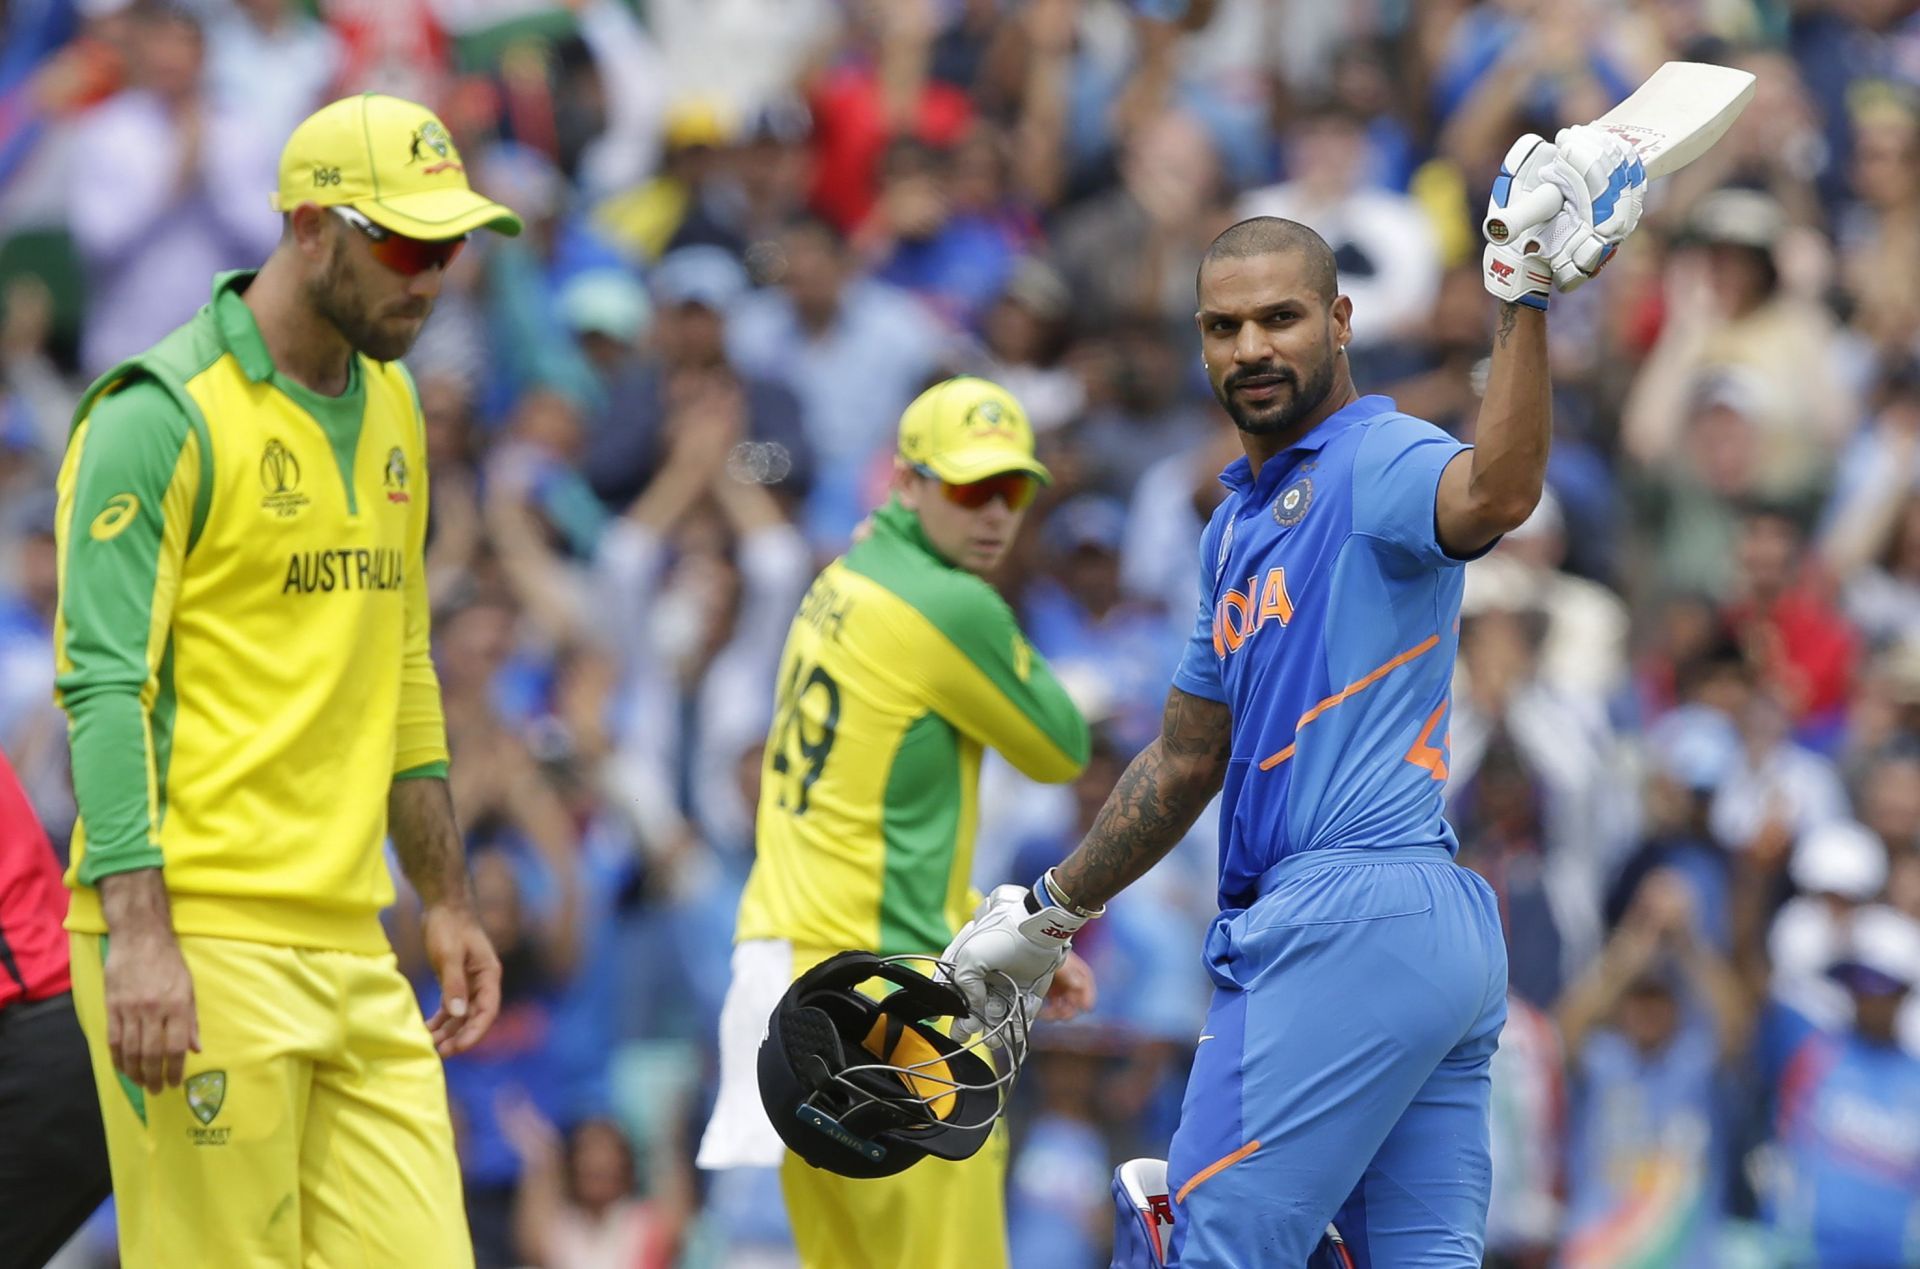 Shikhar Dhawan scored a century against Australia in the 2019 World Cup with a fractured thumb.